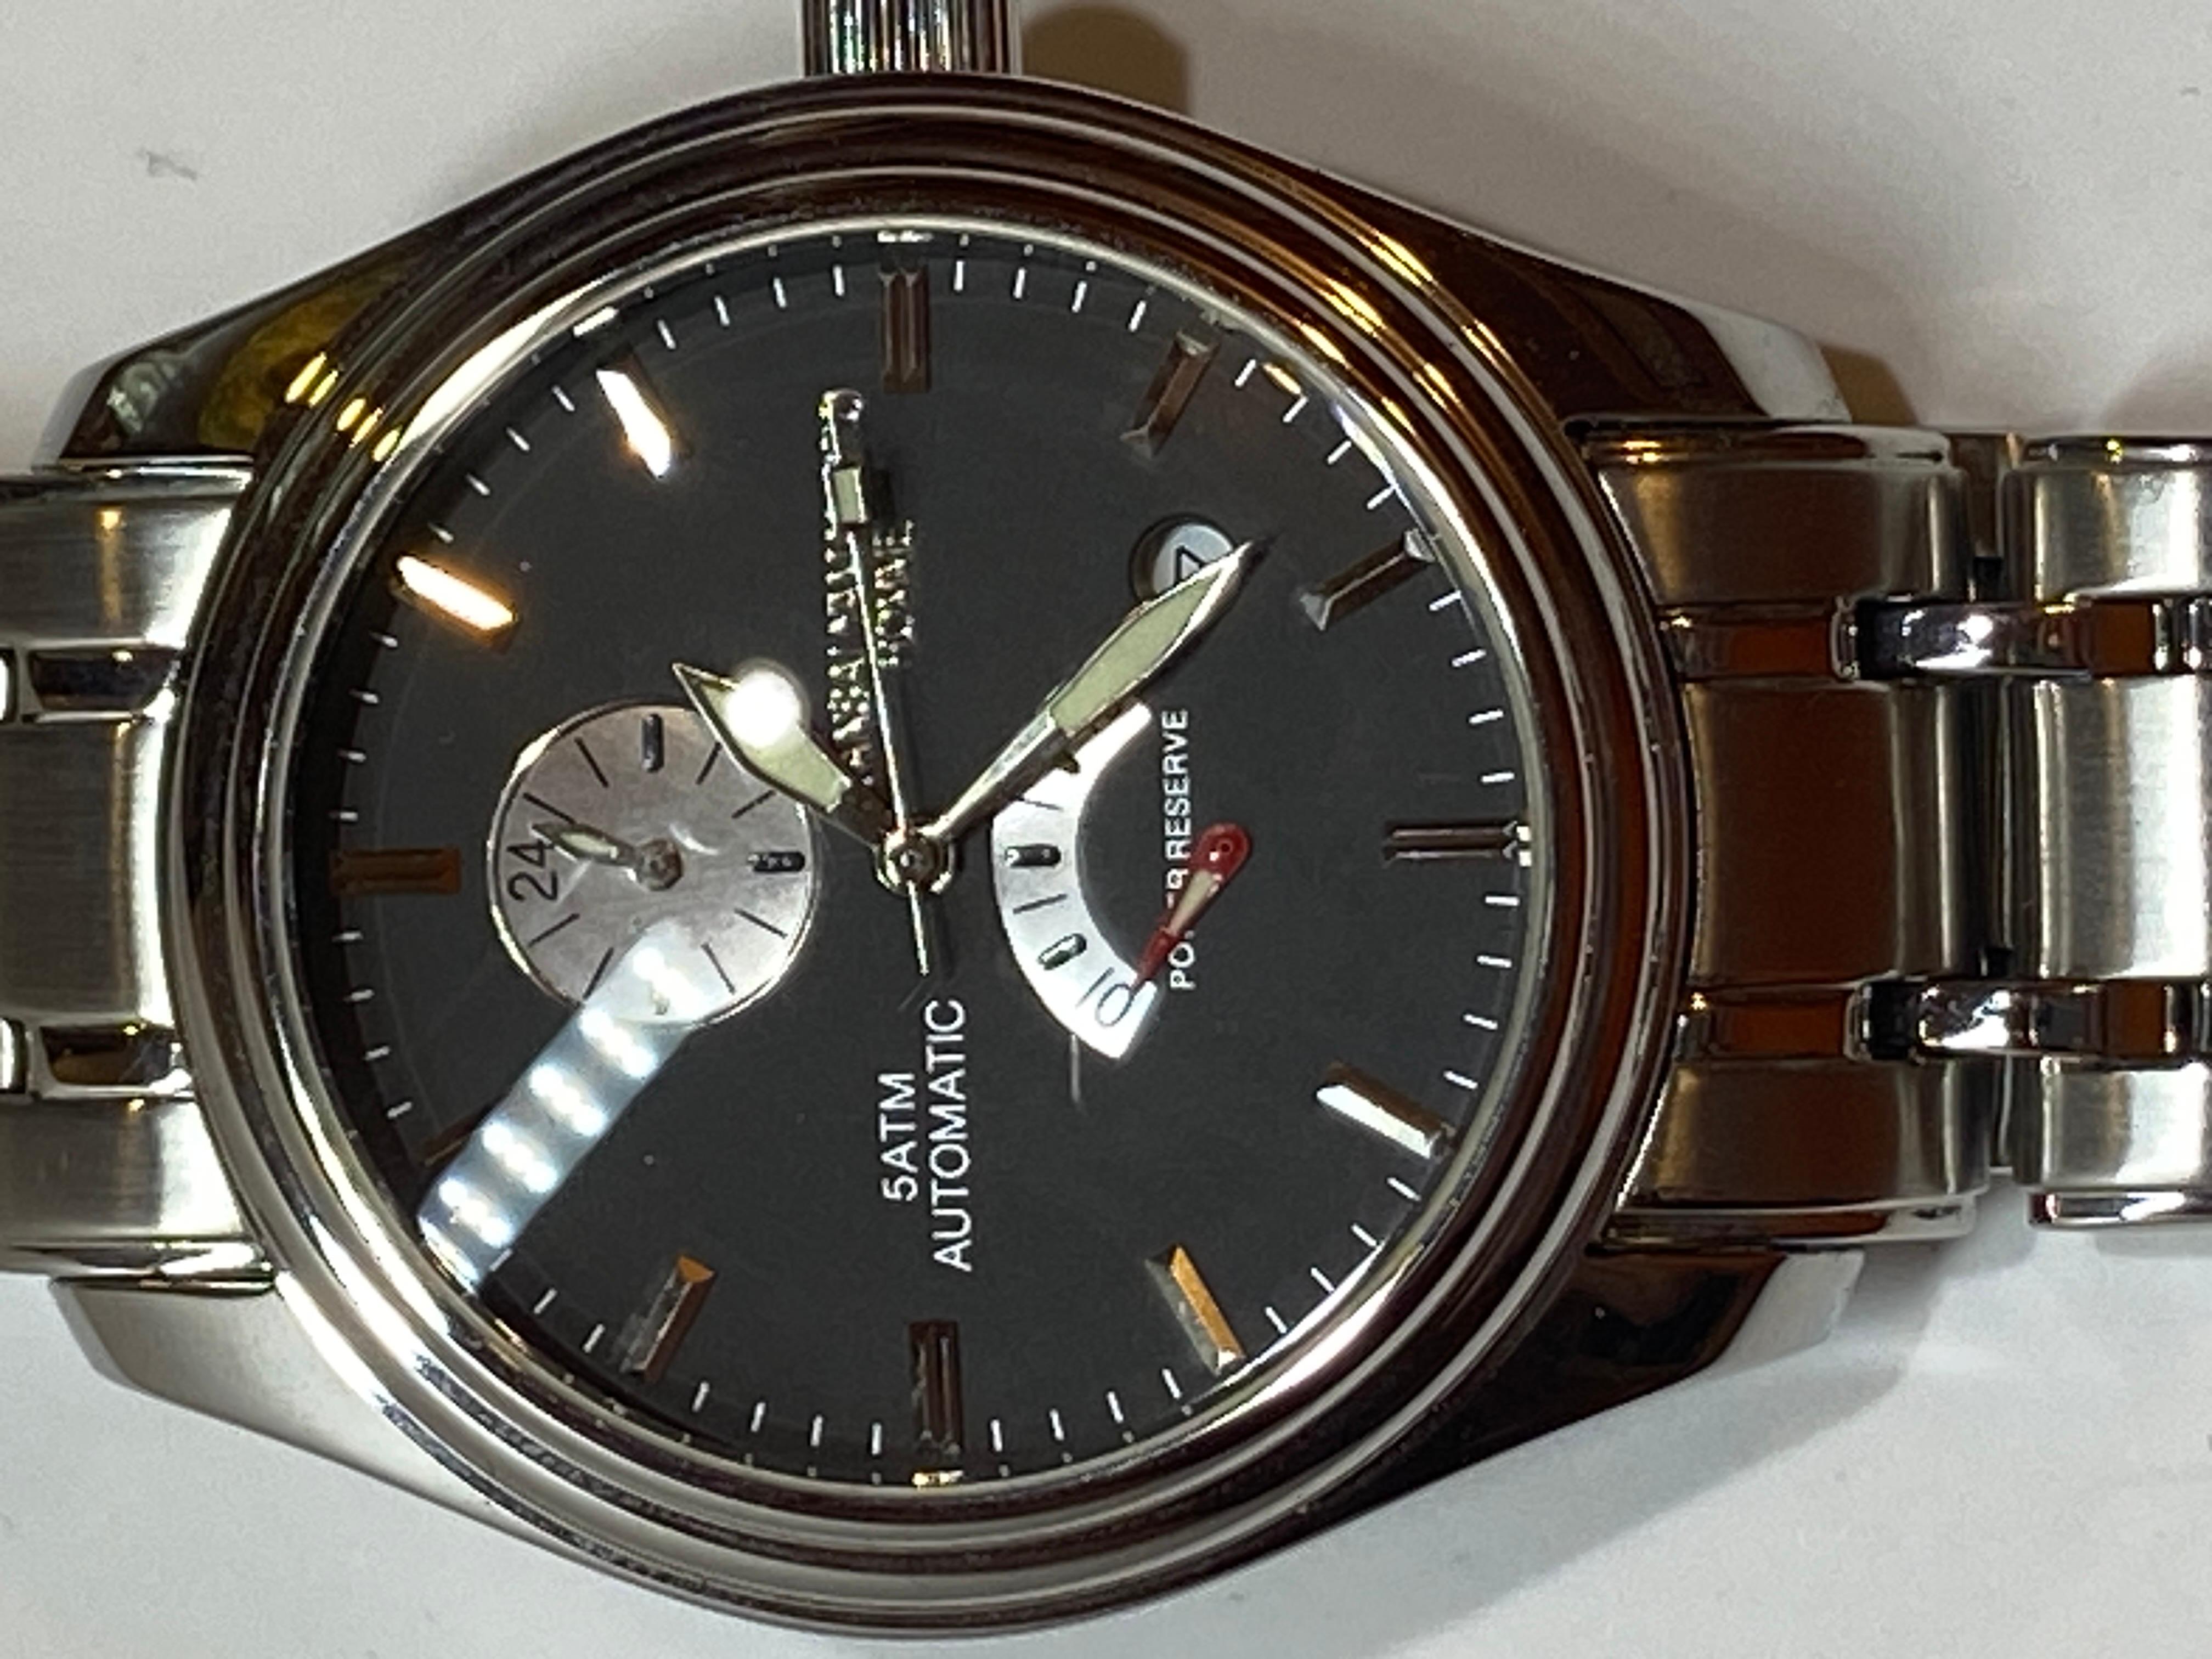 Kansai Yamamoto 5 ATM Automatic, Water Resistant, 22 Jewels, Skeleton-Back Watch In Good Condition For Sale In New York, NY